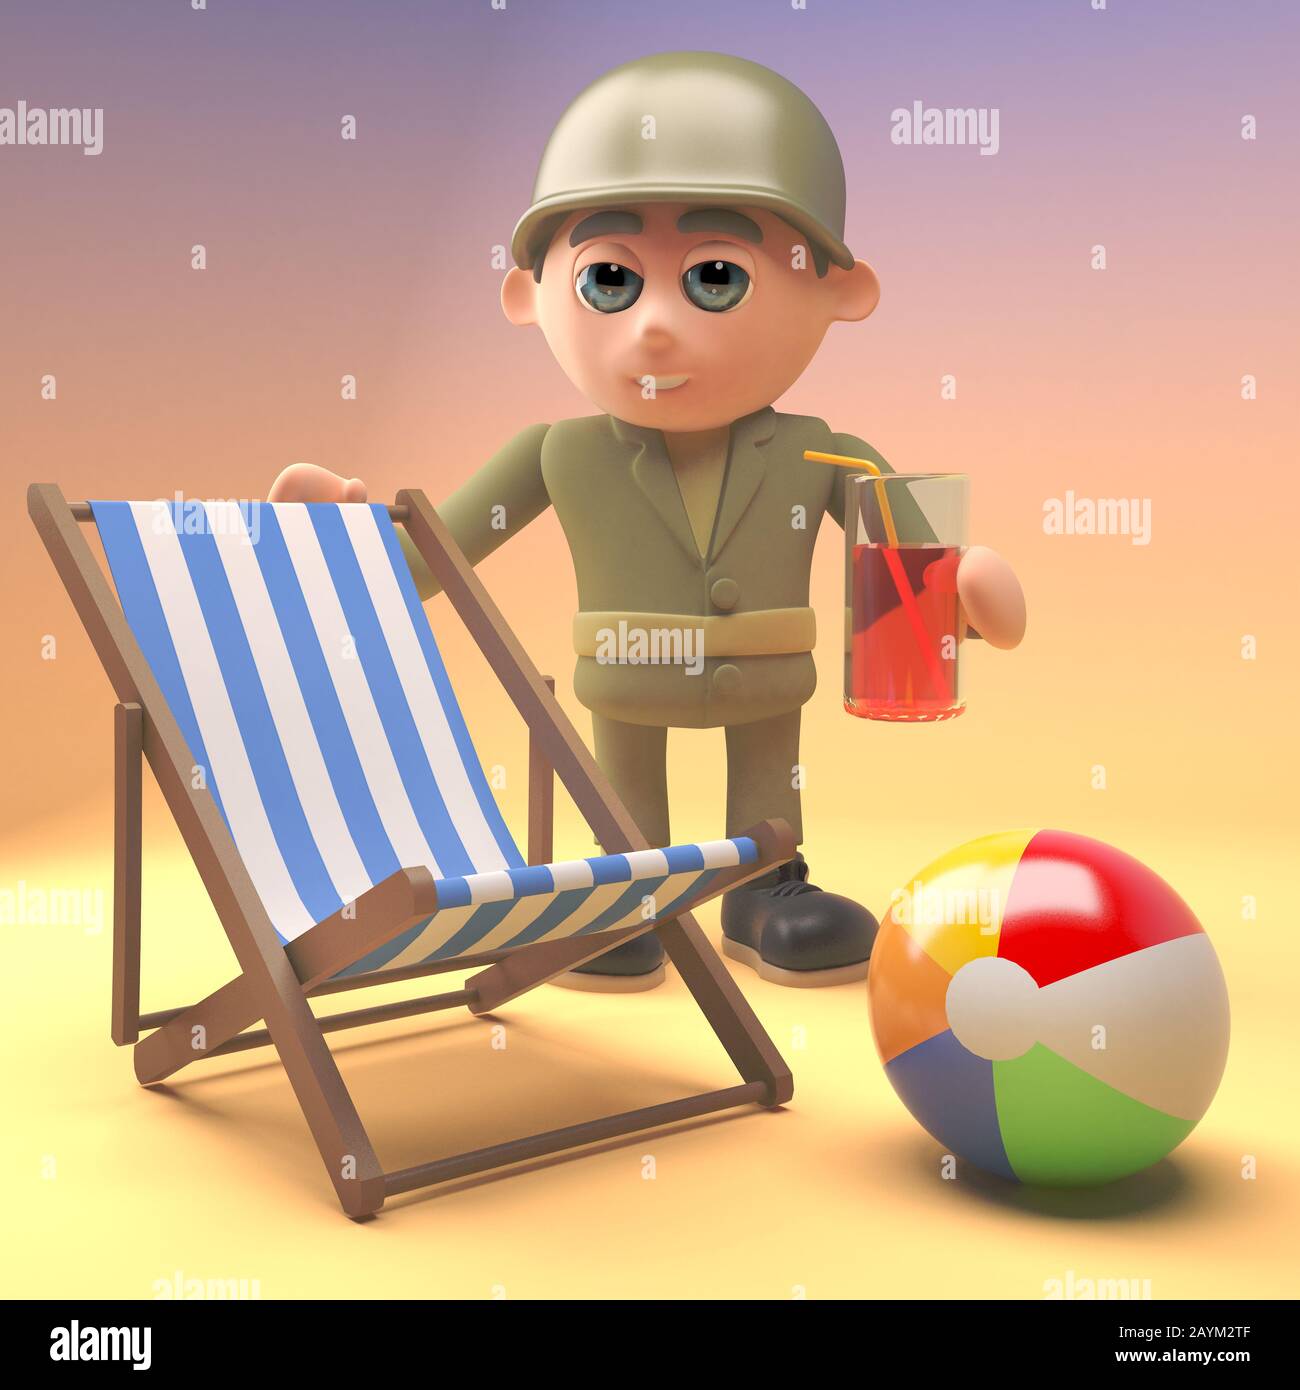 Army soldier relaxes at the beach with a deckchair and drink,, 3d illustration render Stock Photo